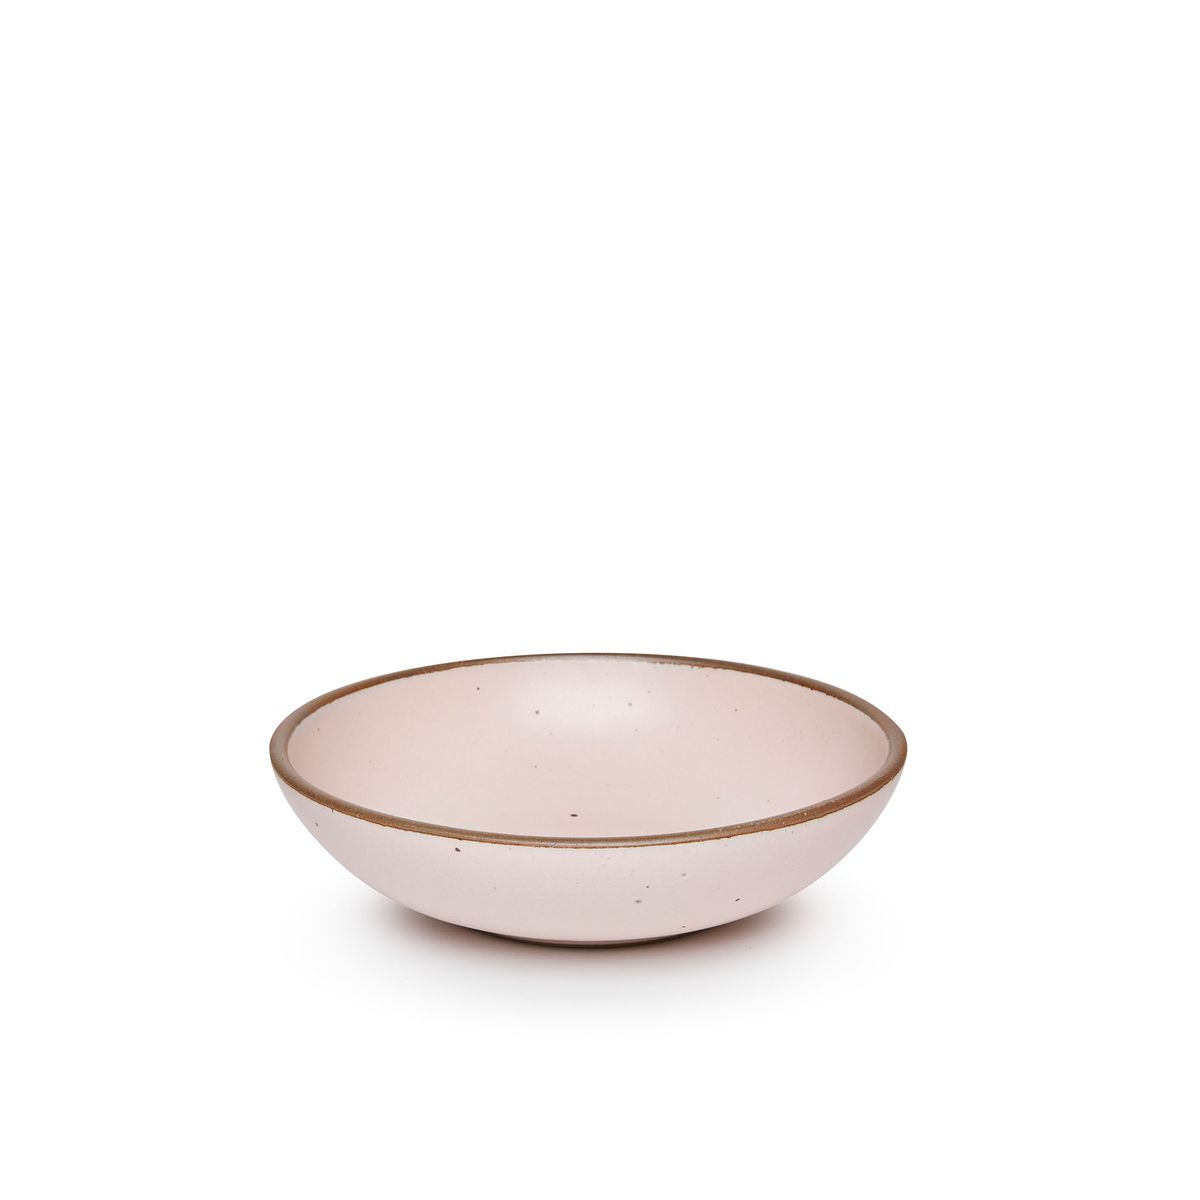 A dinner-sized shallow ceramic bowl in a soft light pink color featuring iron speckles and an unglazed rim